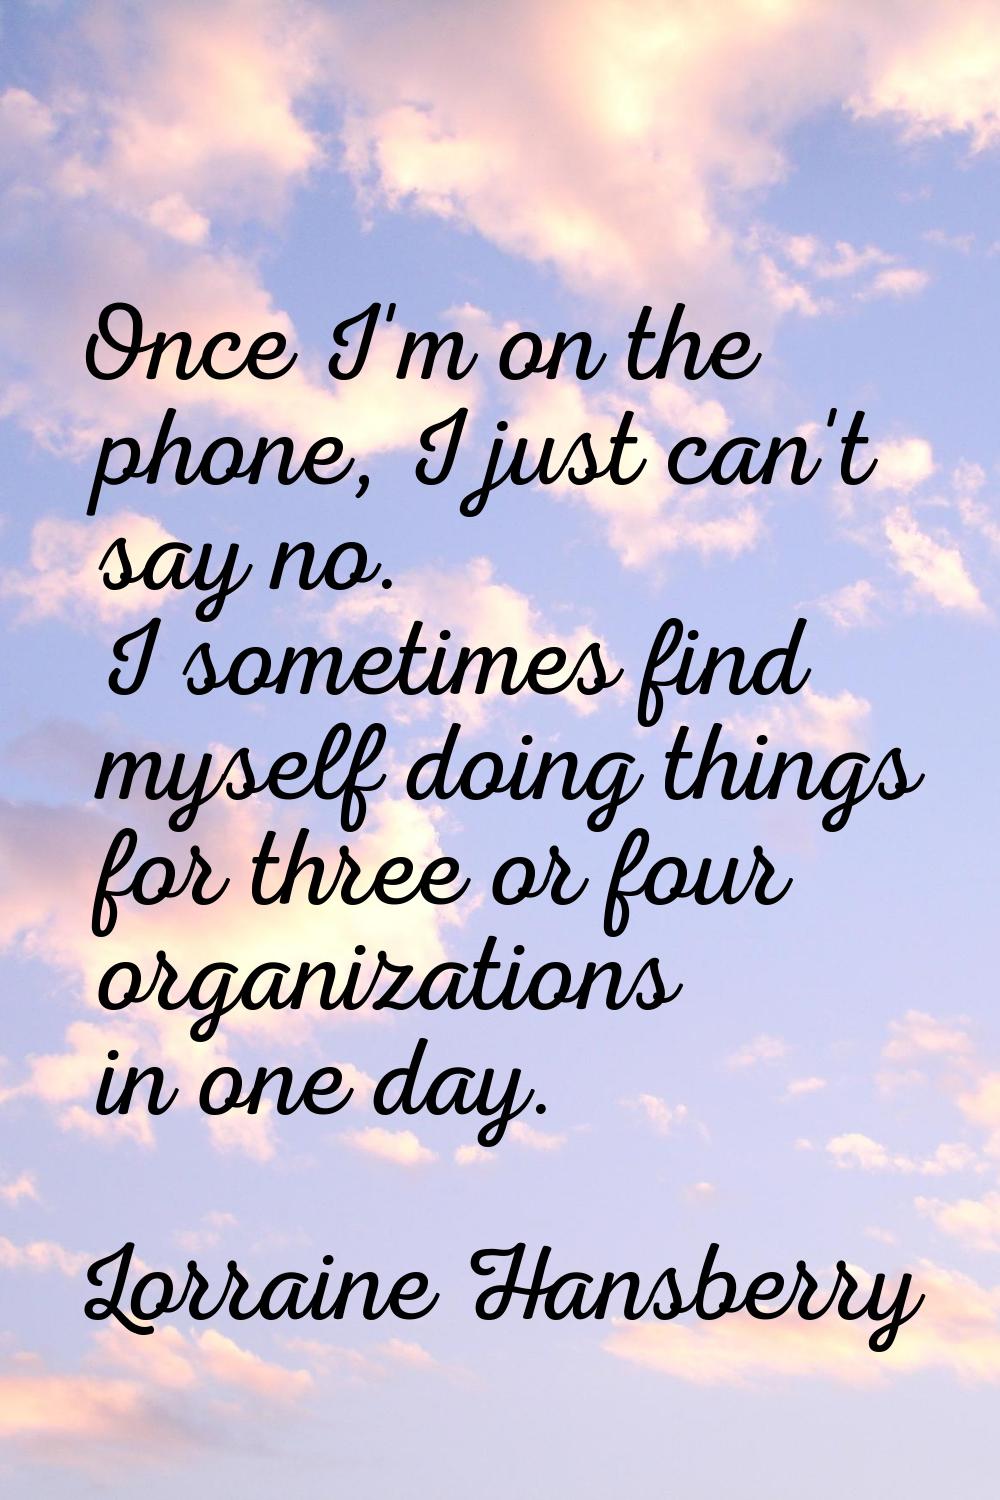 Once I'm on the phone, I just can't say no. I sometimes find myself doing things for three or four 